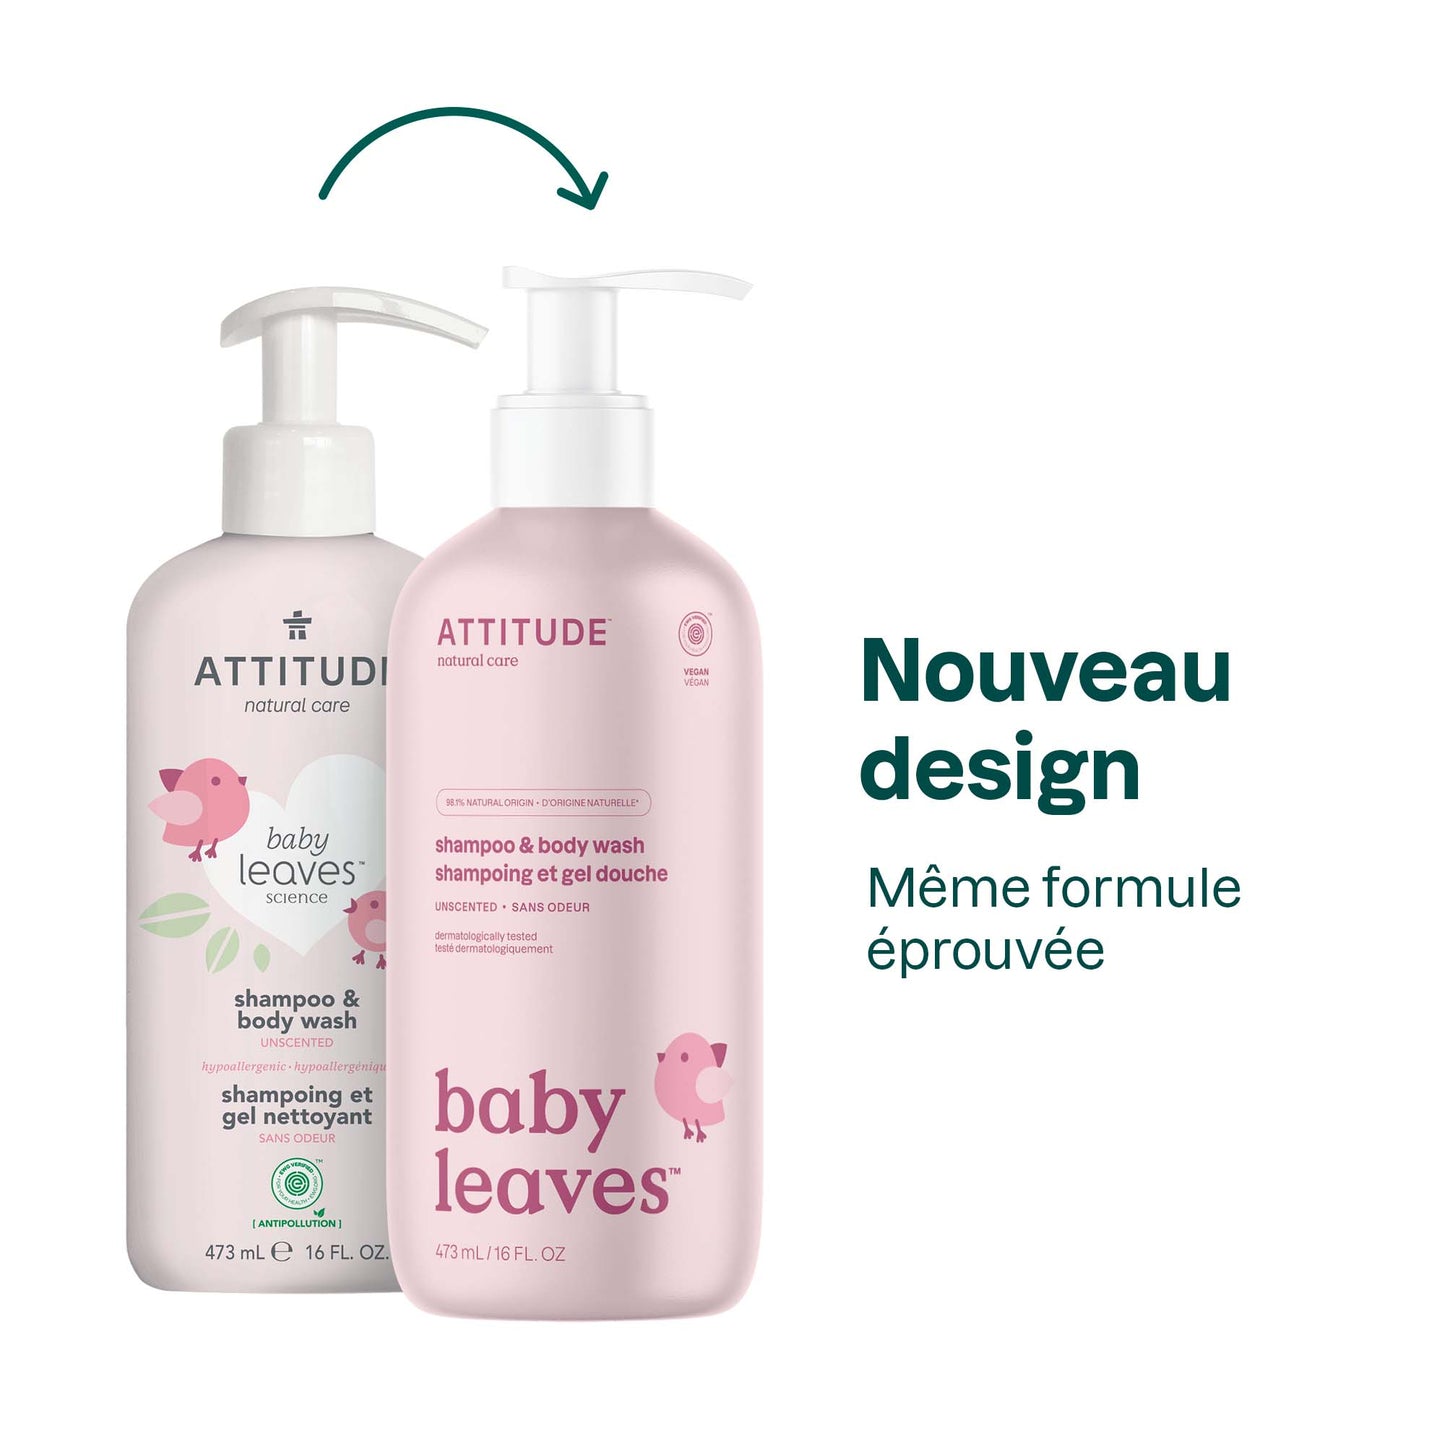 ATTITUDE baby leaves™ 2-in-1 Shampoo & Body Wash Fragrance-free 16615_en? Unscented